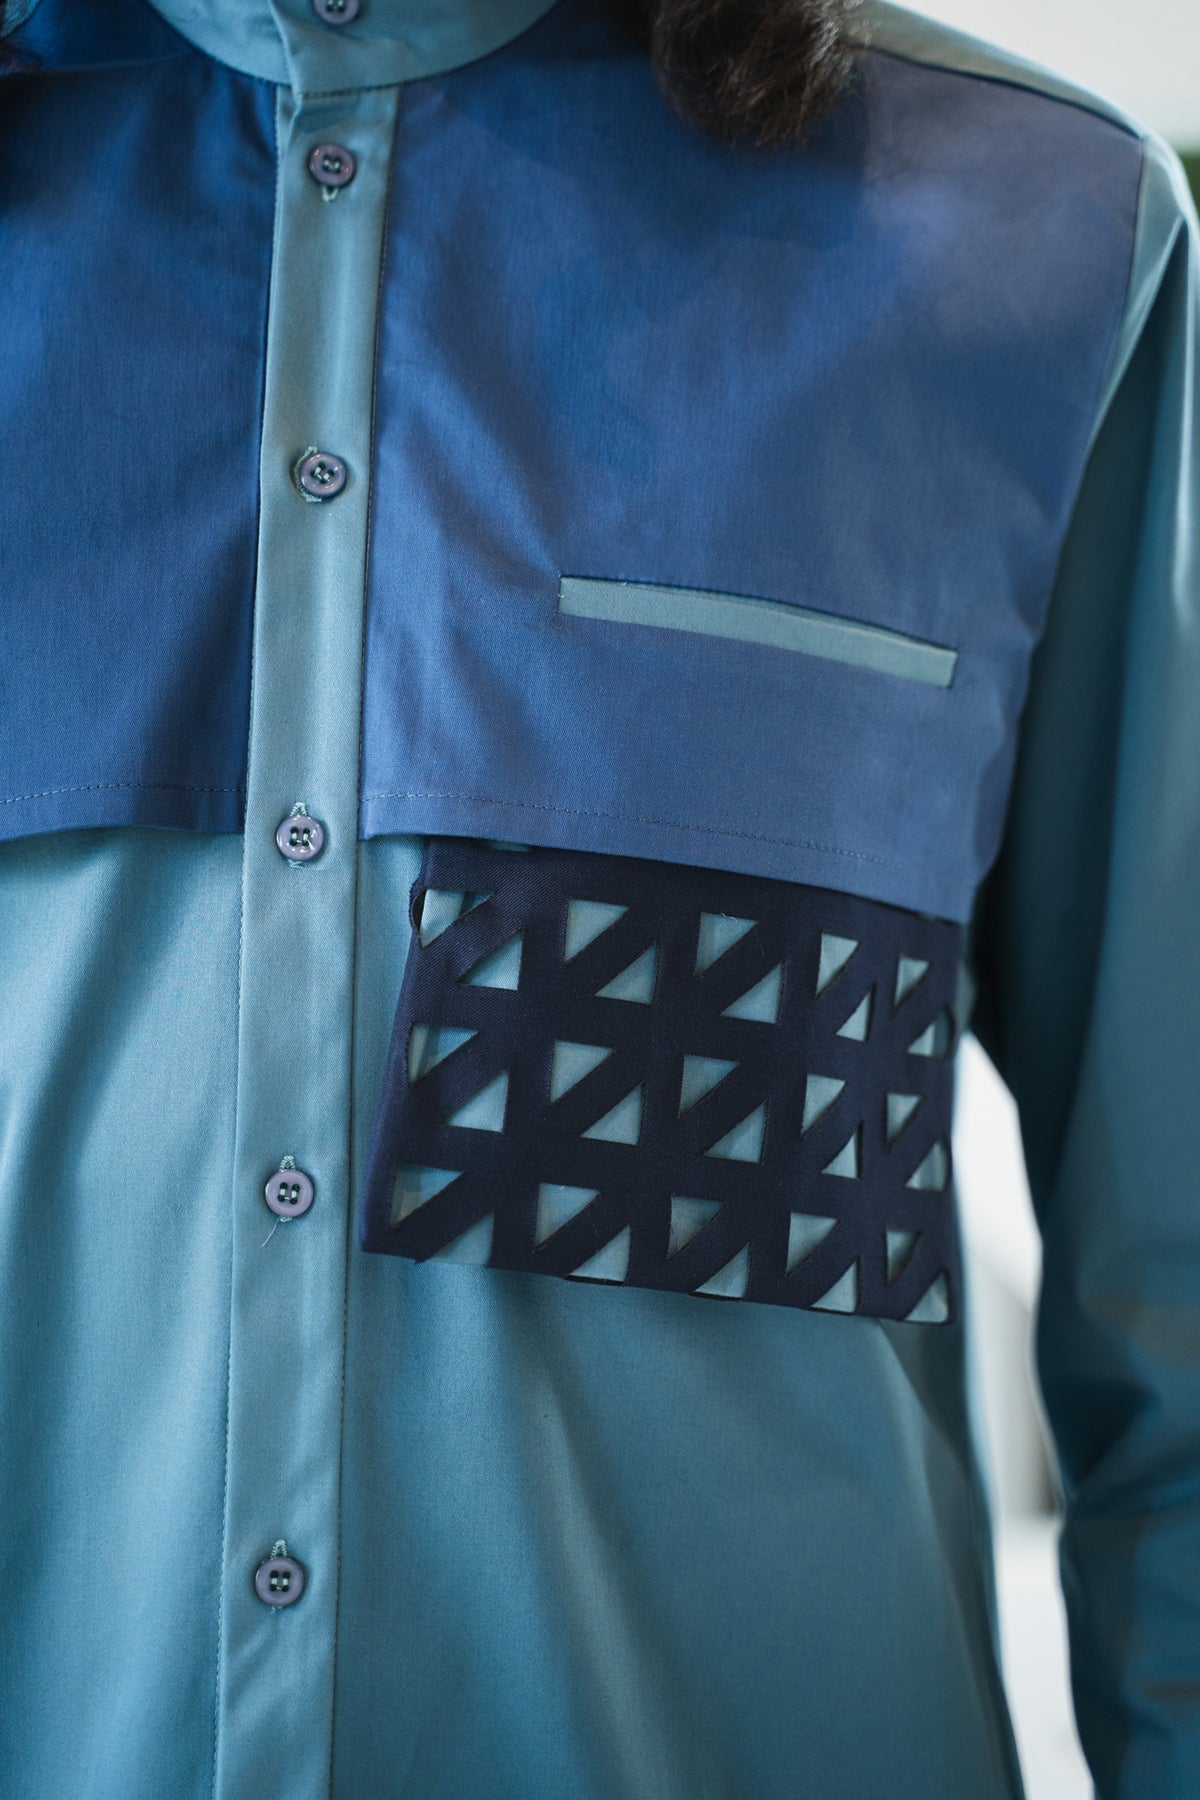 Architectural shirt with kirigami pockets